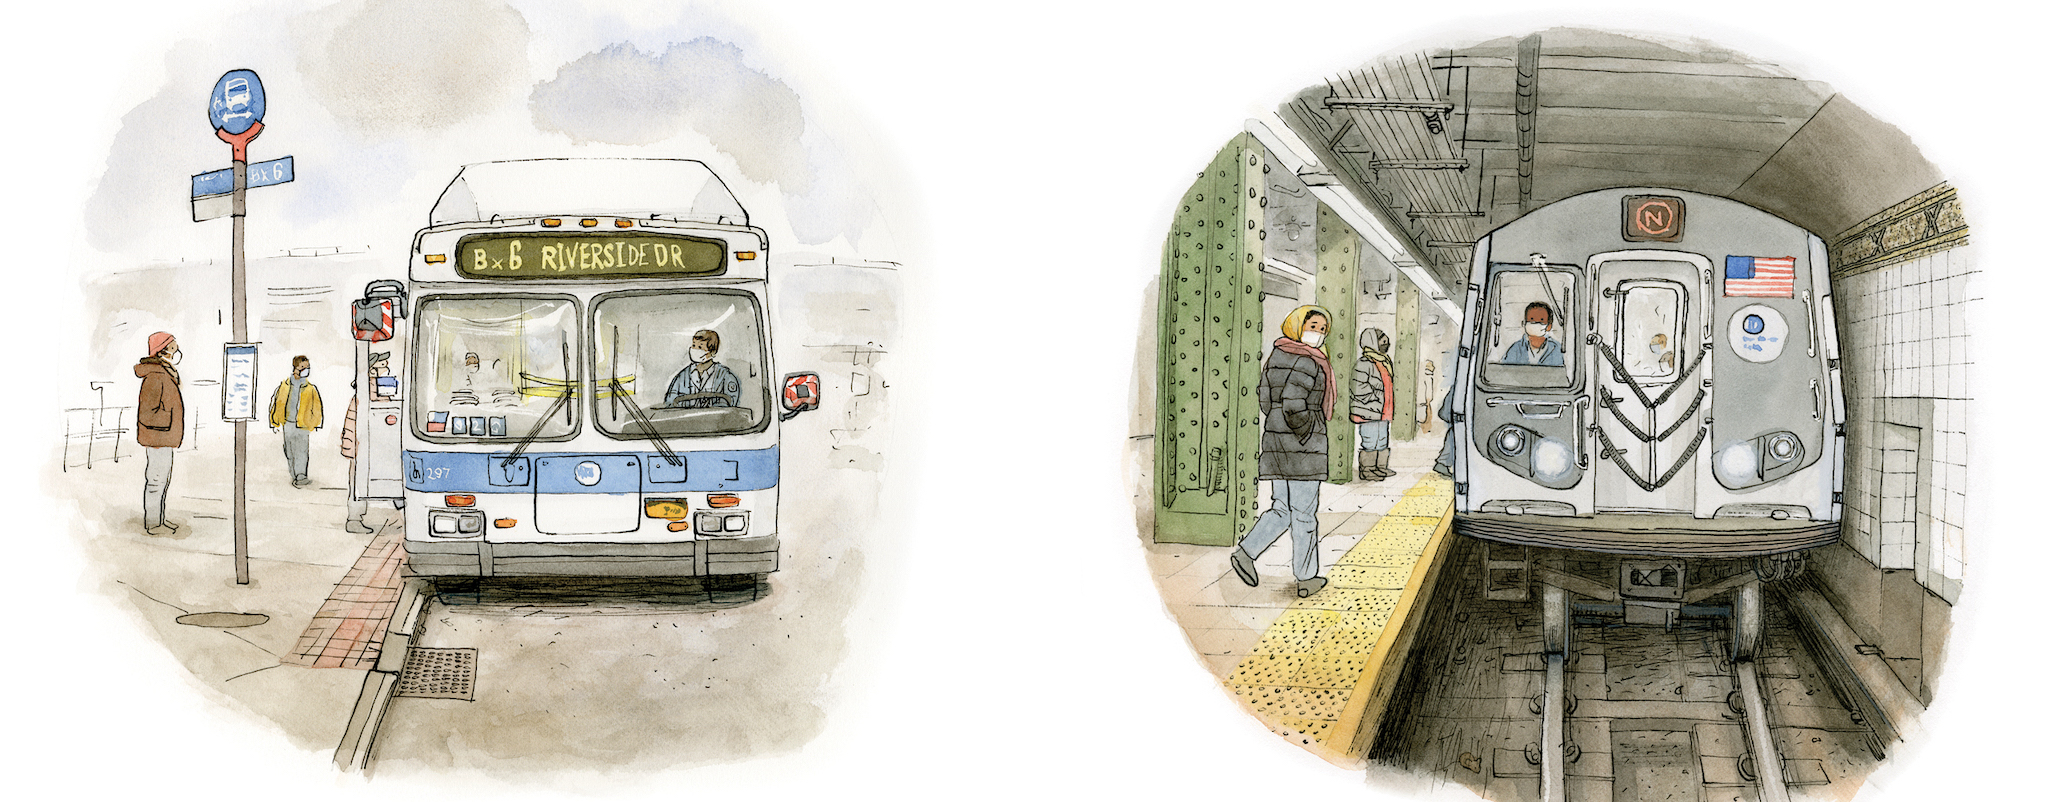 A page from Brian Floca's book Keeping the City Going, depicting an NYC bus and subway car.